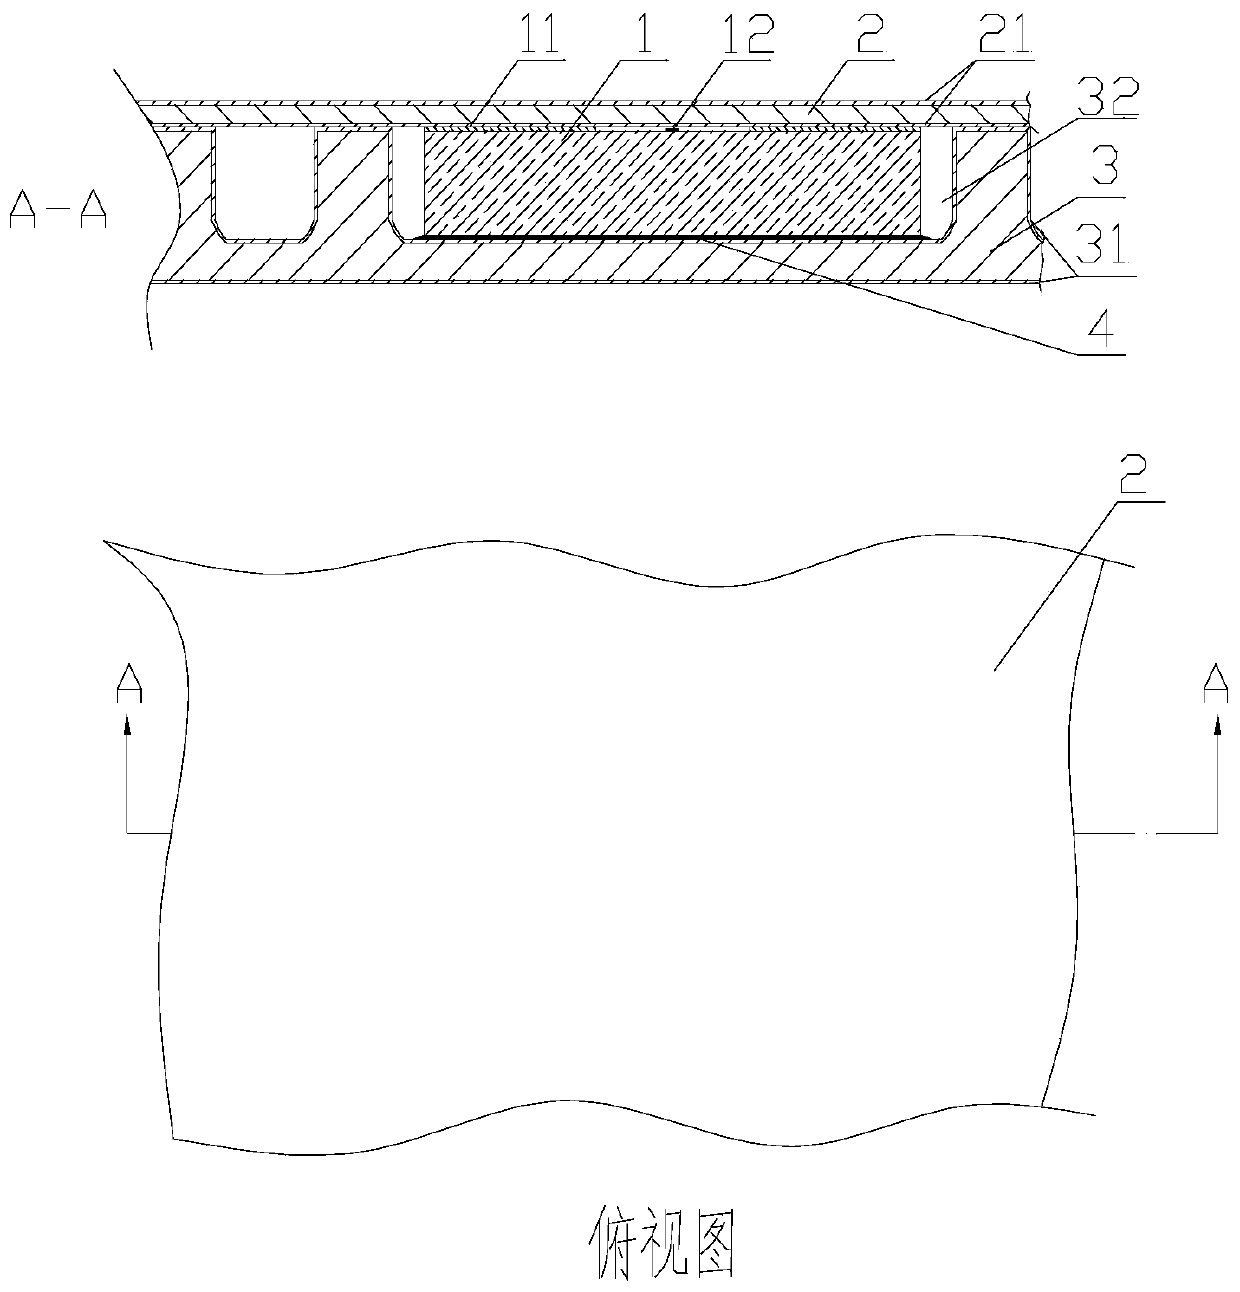 A semiconductor resistance bridge packaging structure and process